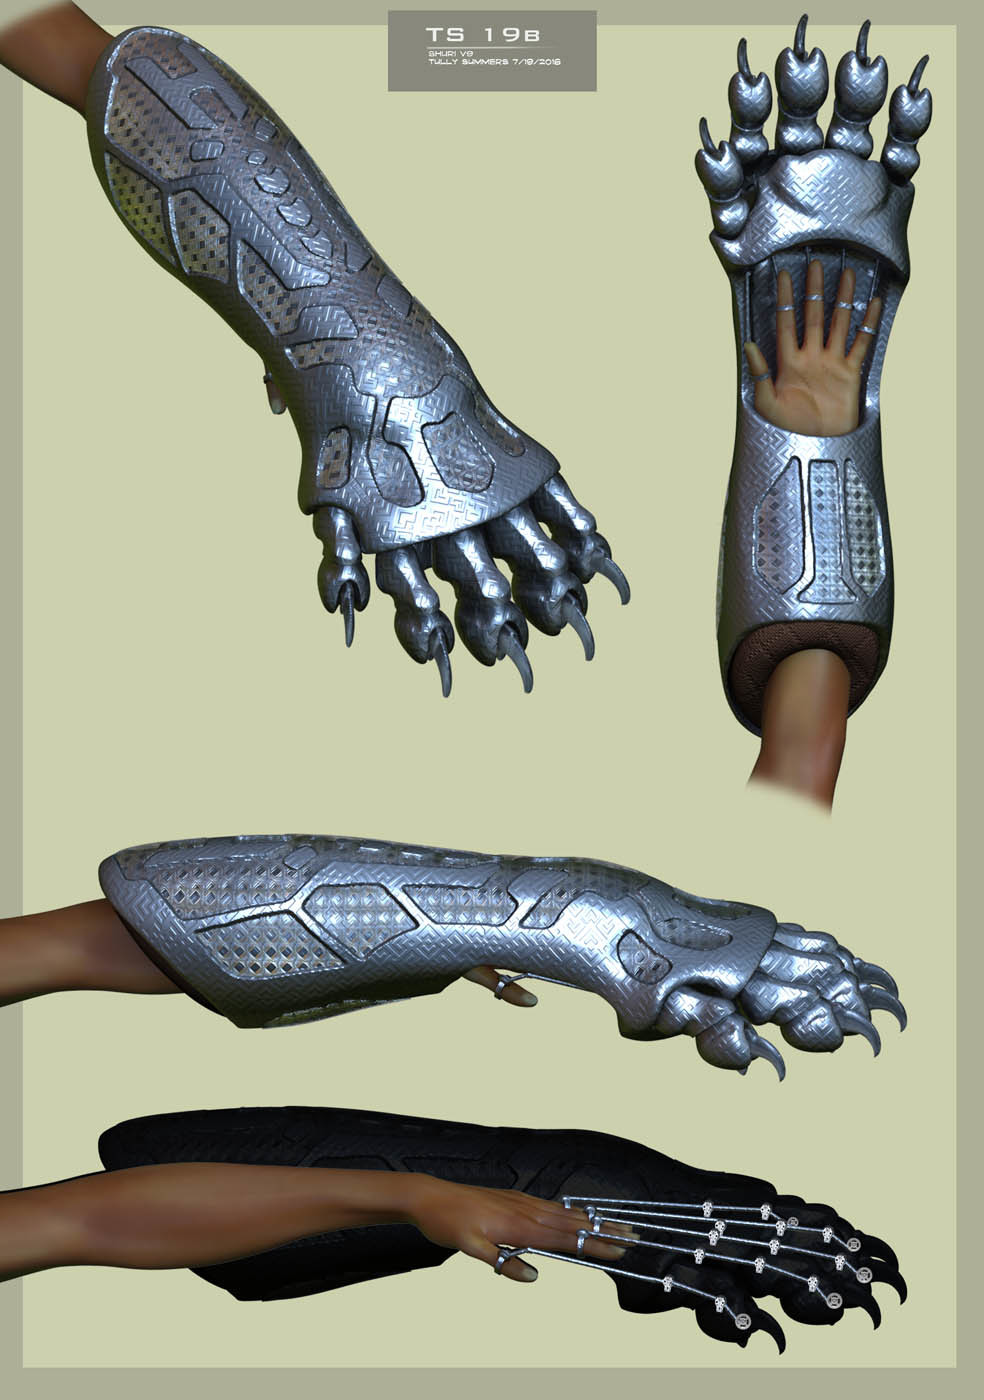 A huge articulated vibranium power claw option.  They were originally interested in having her gauntlets be extremely large.